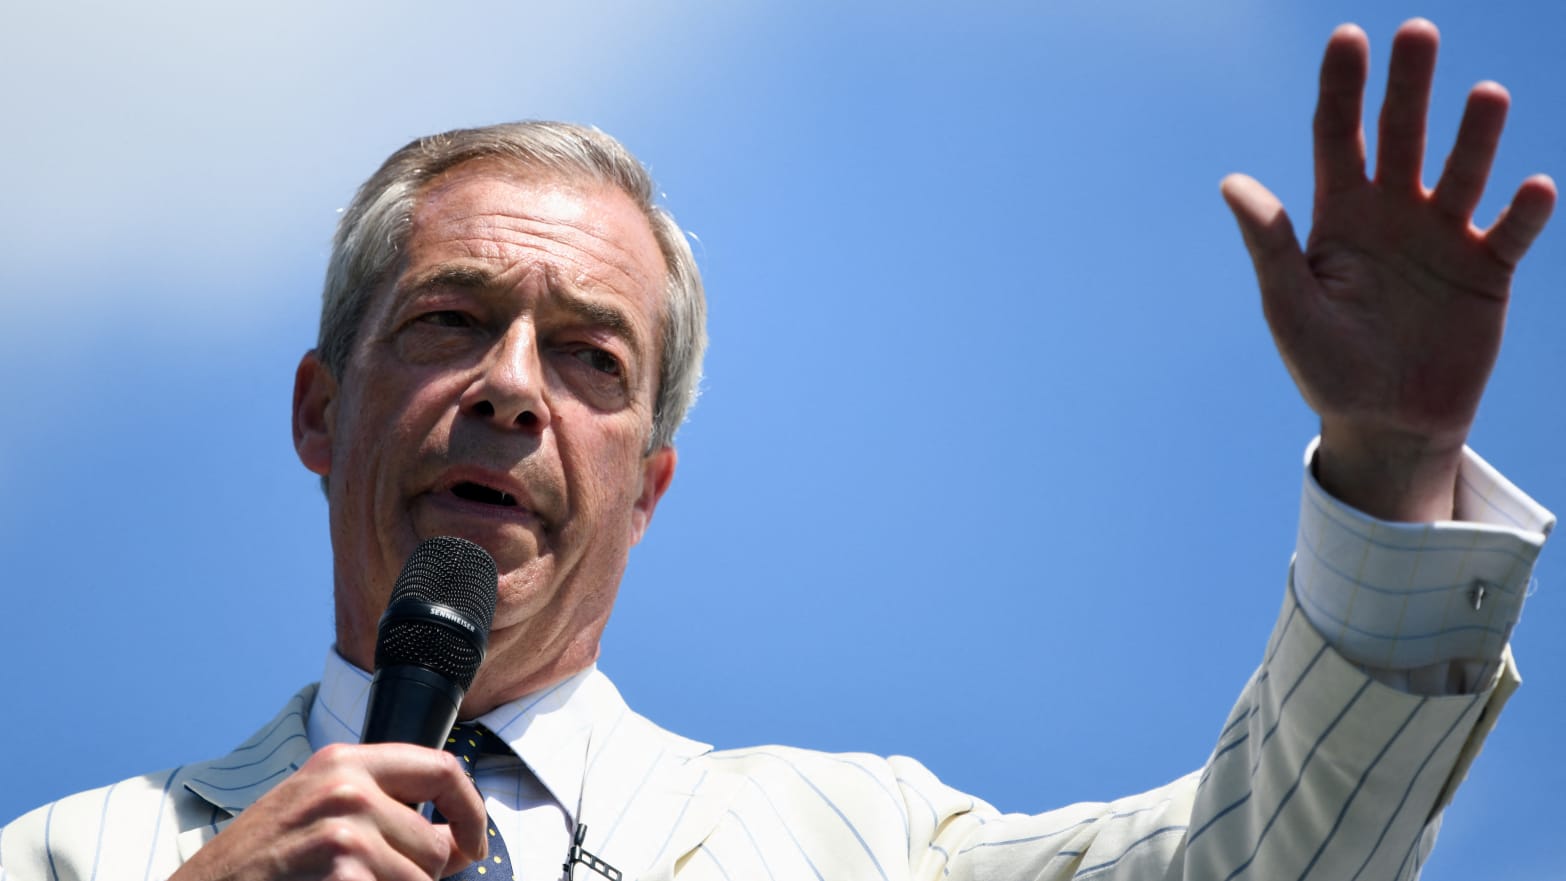 Nigel Farage claims racist comments made by a canvasser for his Reform U.K. party were part of a “setup” after discovering the man is an actor.